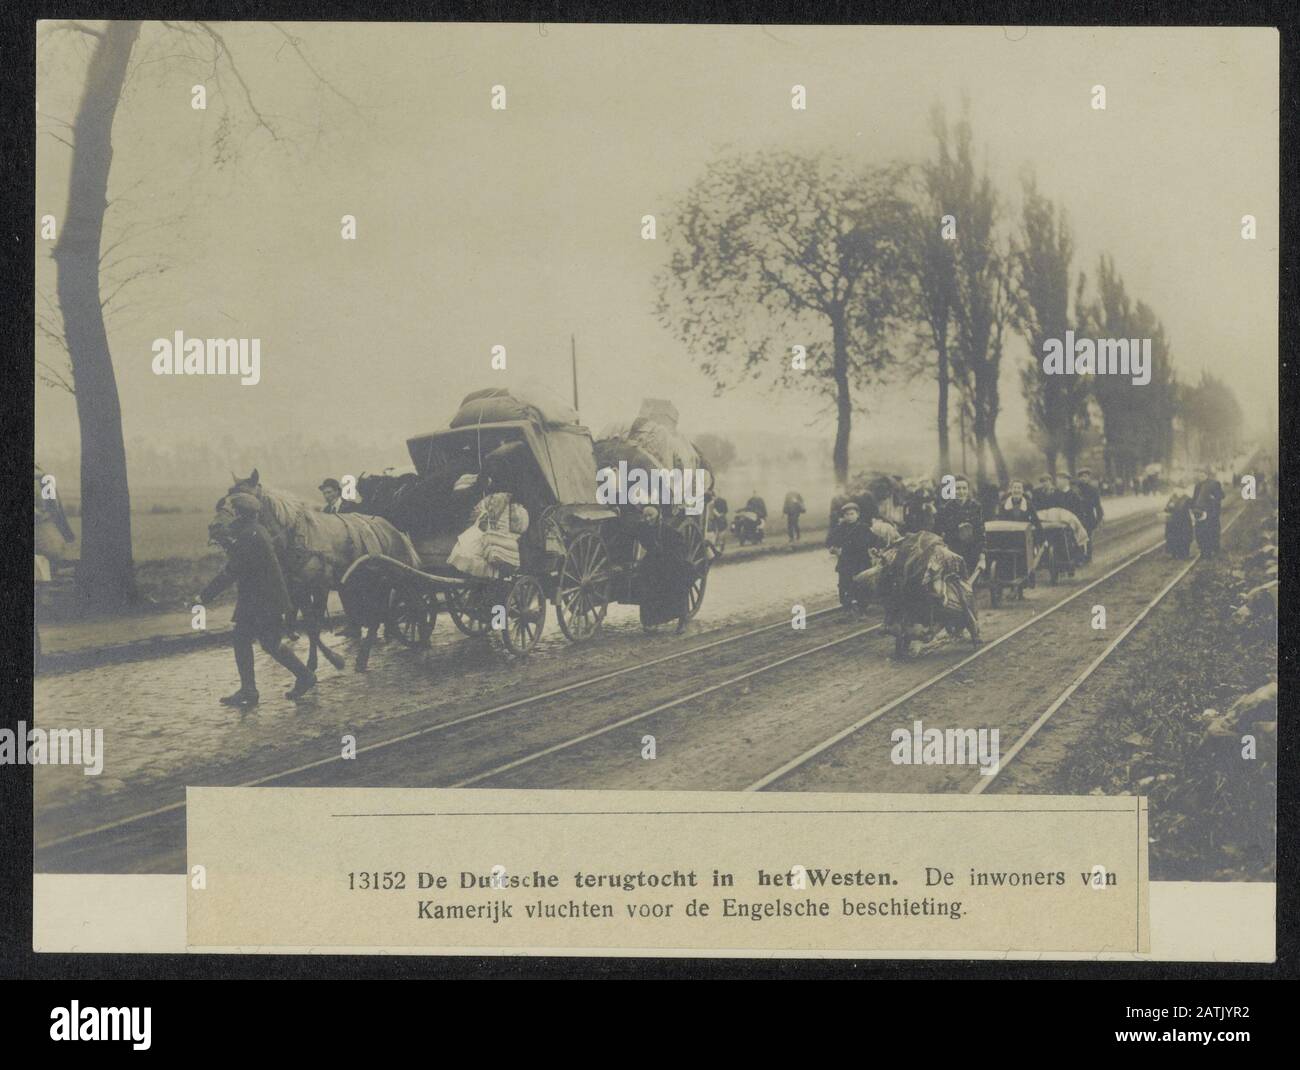 The German retreat in the West Description: The inhabitants of Cambrai flee the British bombardment. Date: {1914-1918} Location: Belgium, Cambrai Keywords: shelling, first world cities, retreats Stock Photo